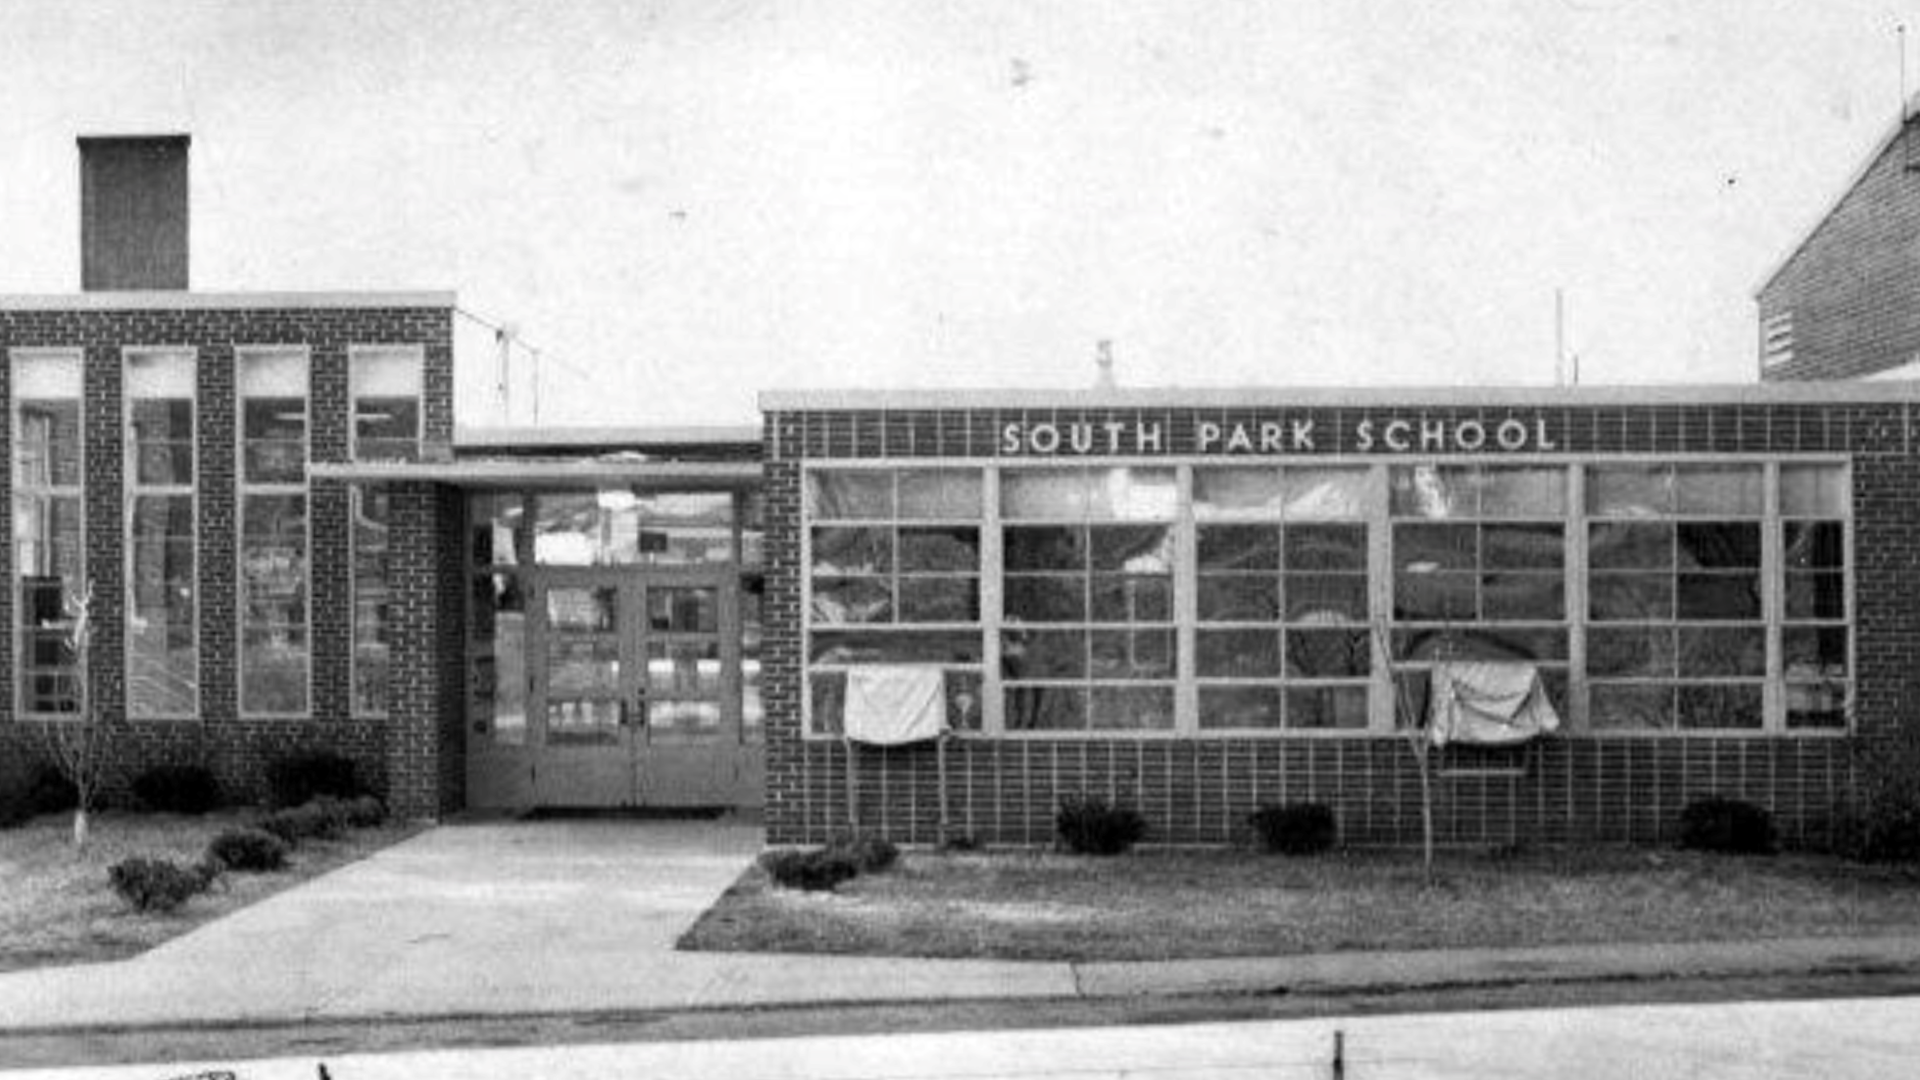 About – South Park Elementary School